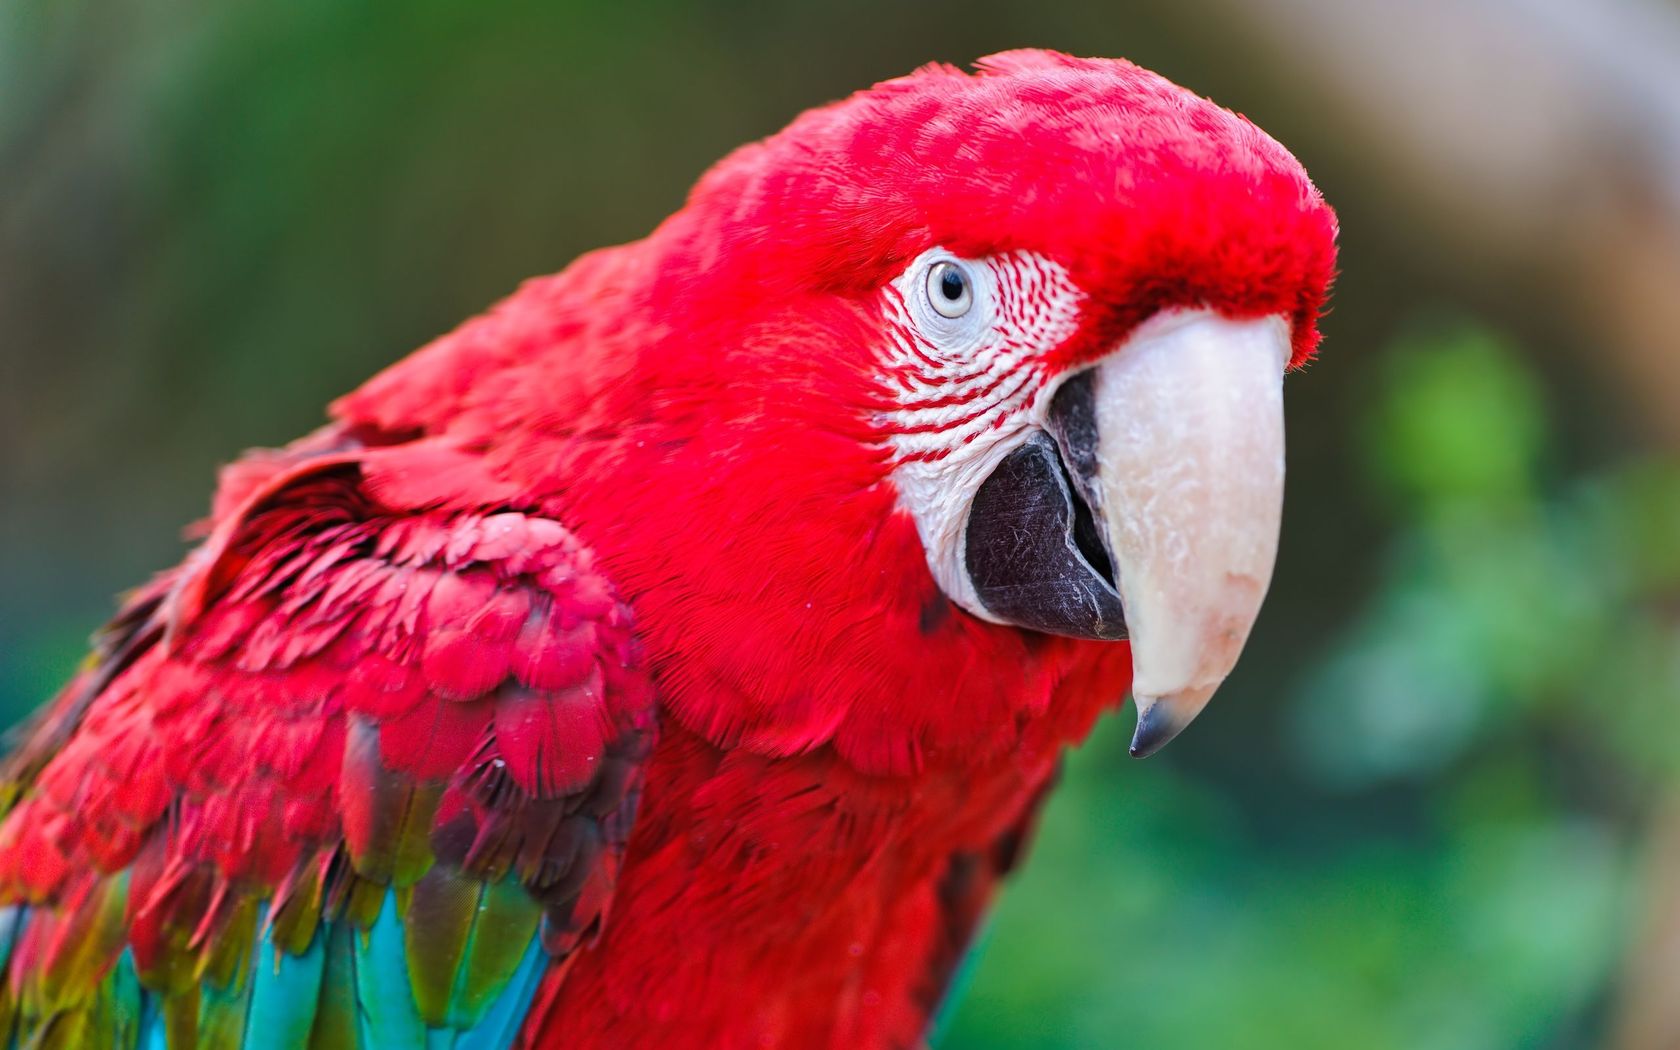 Red Macaw Parrot